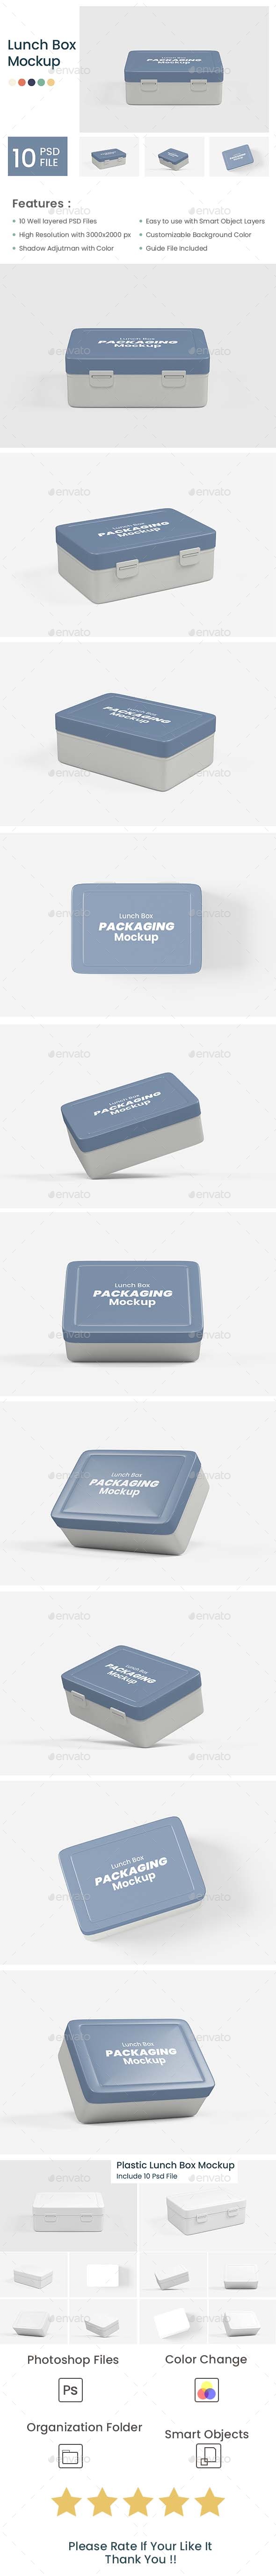 [DOWNLOAD]Lunch Box Mockup